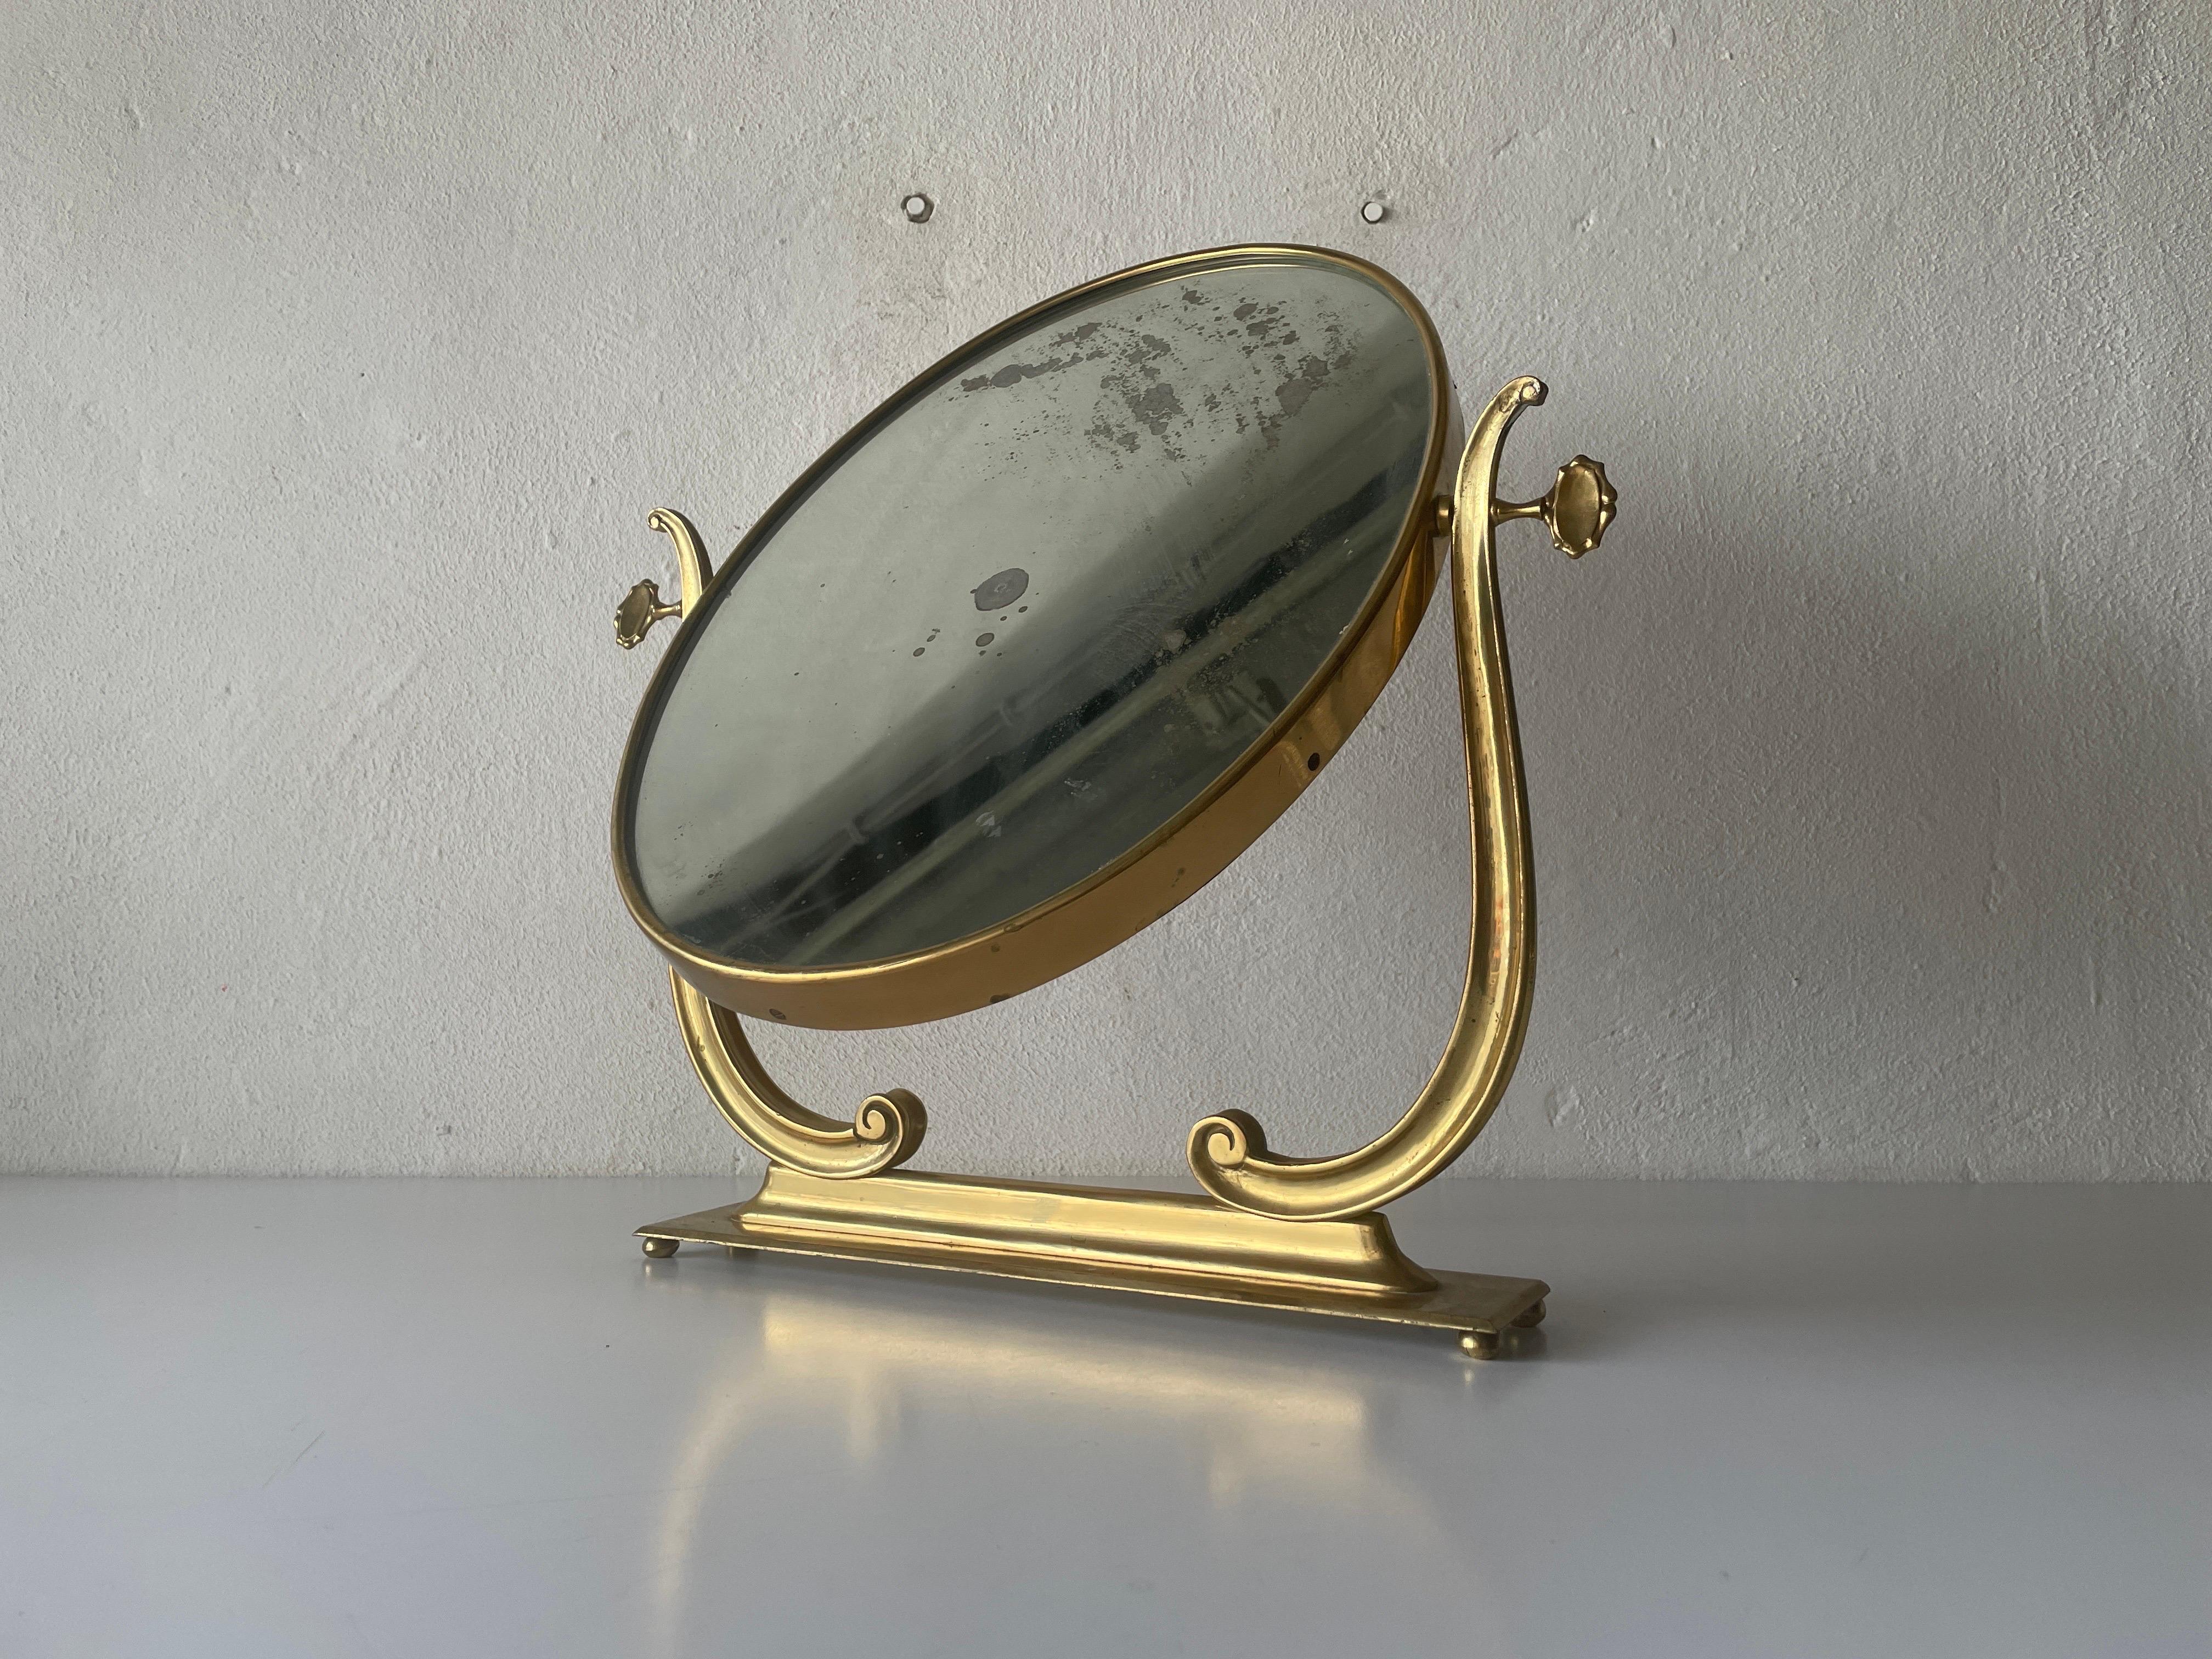 Brass Oval Frame Vanity Table Mirror, 1960s, Italy

It is very ideal and suitable for all living areas.

No damage, no crack.
Wear consistent with age and use.

Measurements: 
Height: 49 cm
Width: 45 cm
Oval Mirror: 43 cm x 32 cm
Base: 37 cm x 7 cm